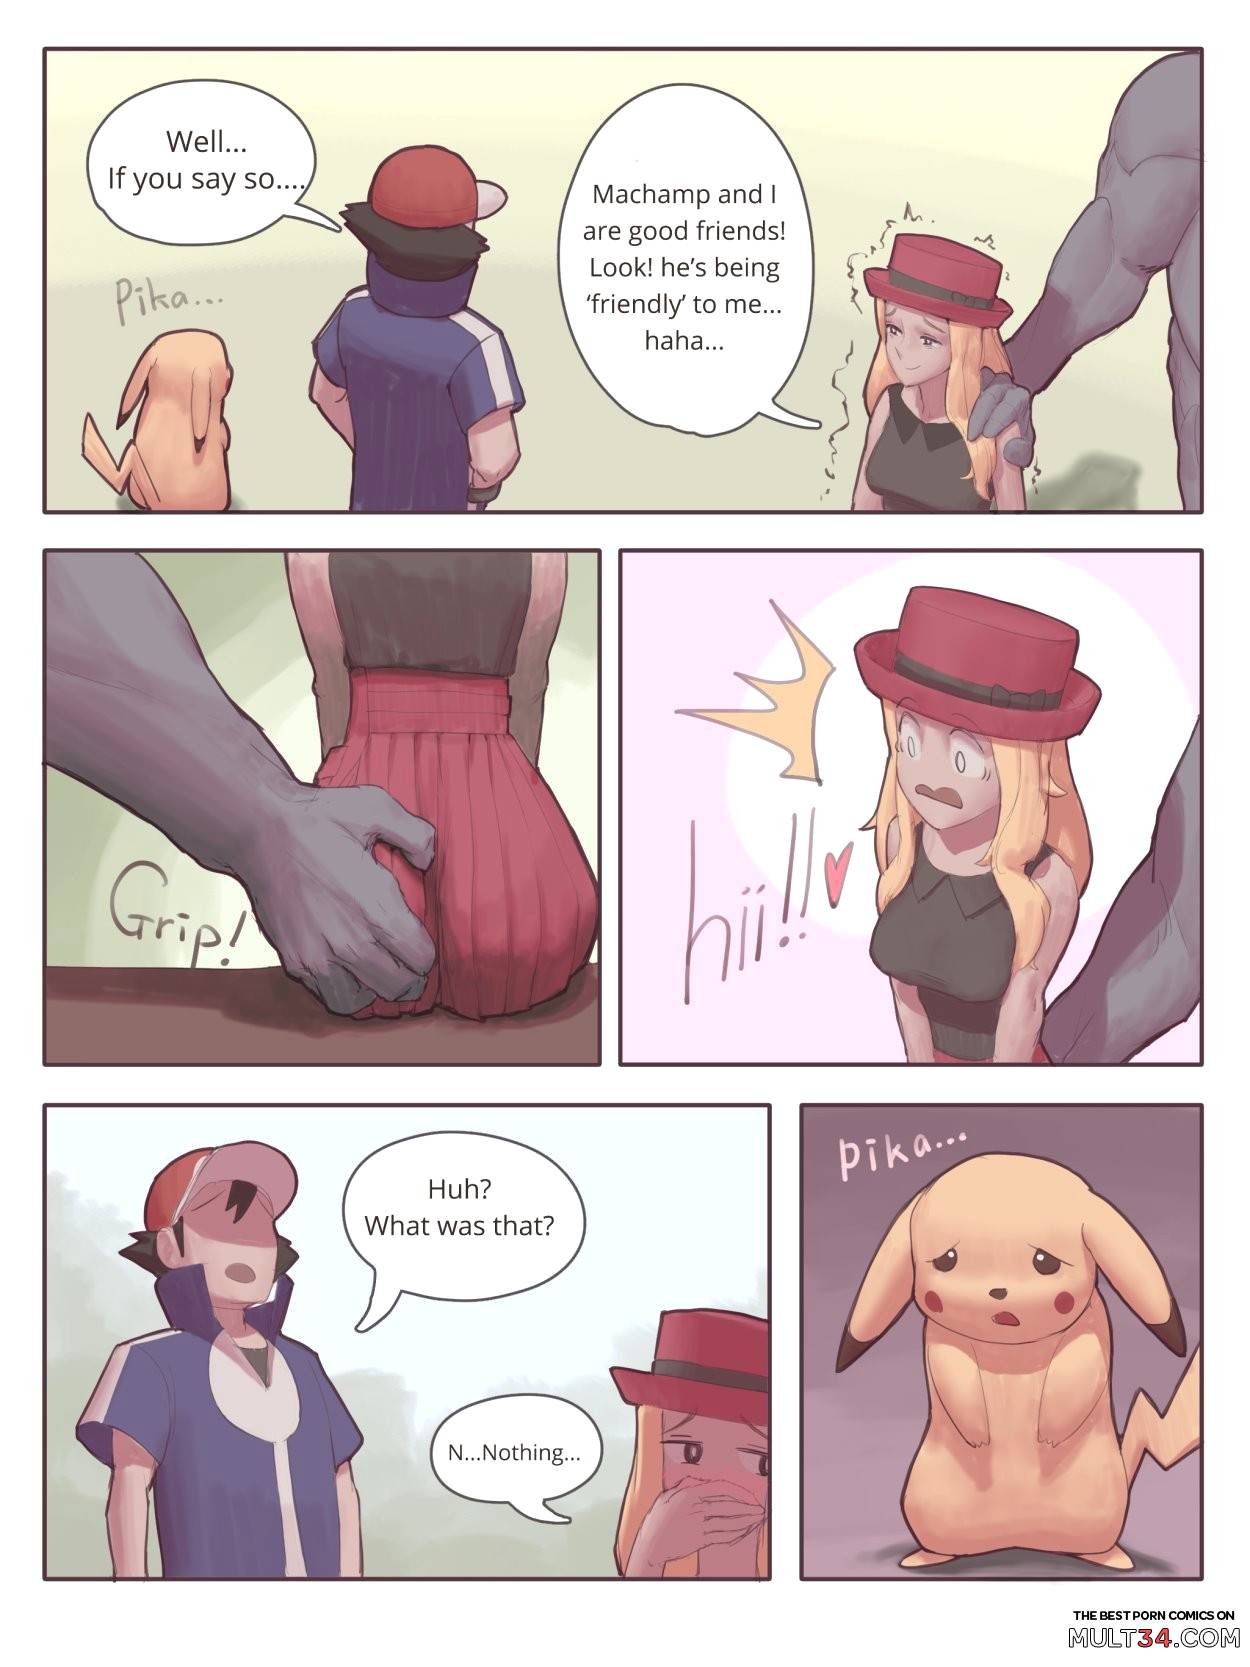 Machamp Used Knock Up! Ch. 3 - Serena page 9